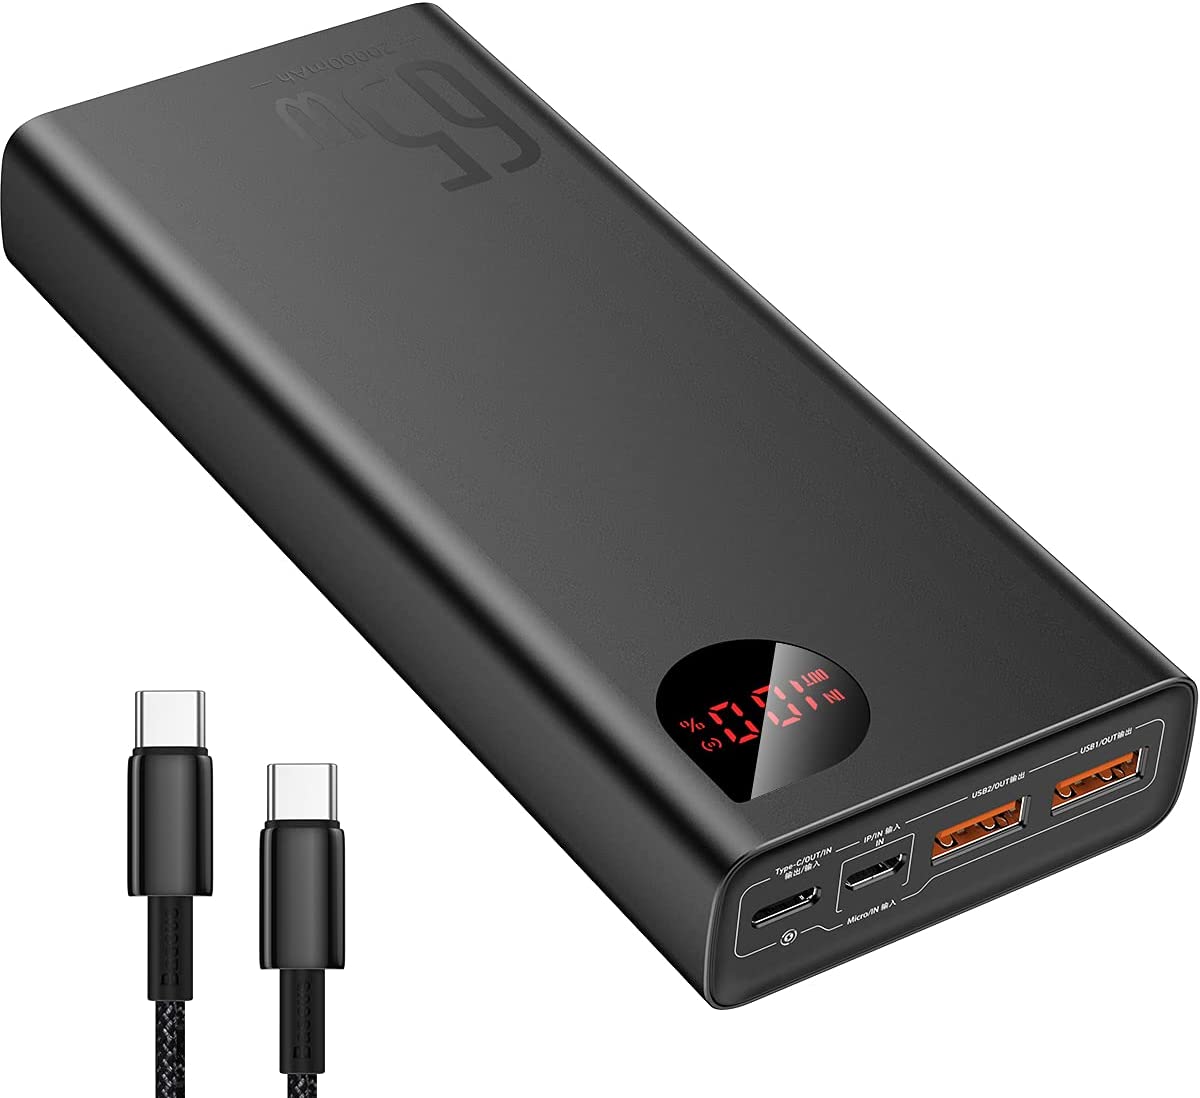 Baseus 65 W USB-C power bank with real-time amp reading now on sale for $45  USD -  News